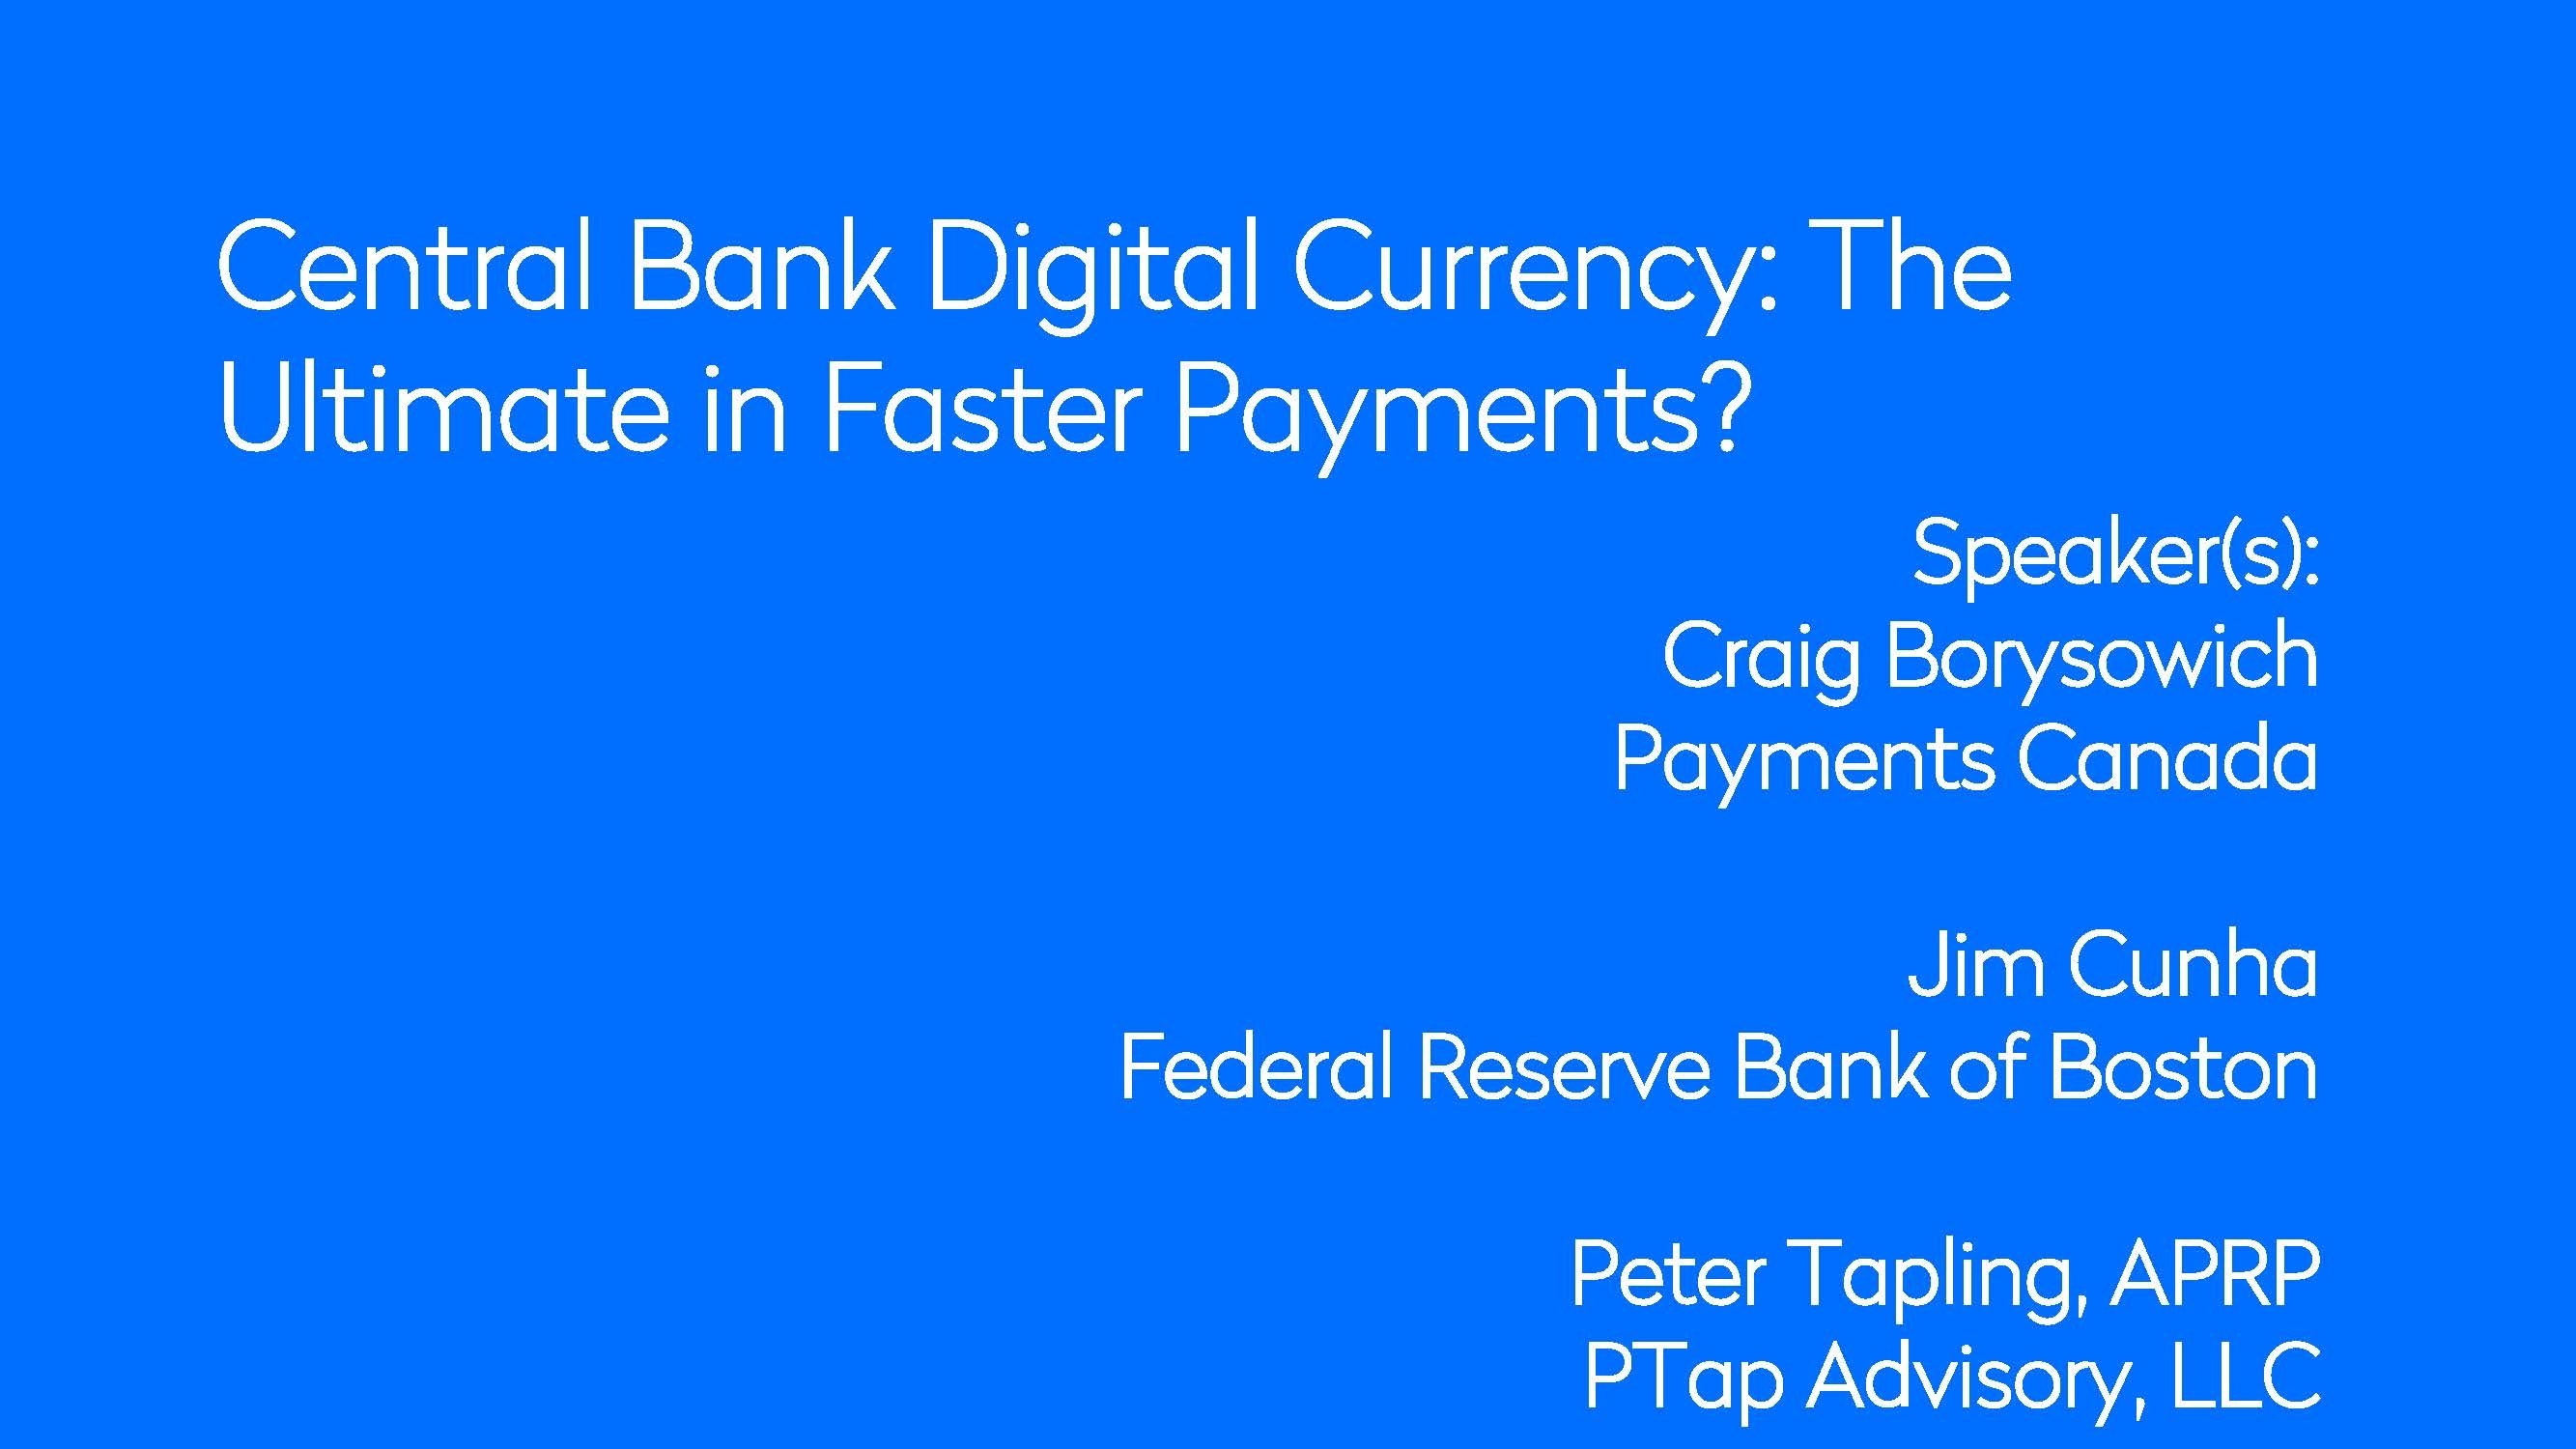 Central Bank Digital Currency: The Ultimate in Faster Payments?